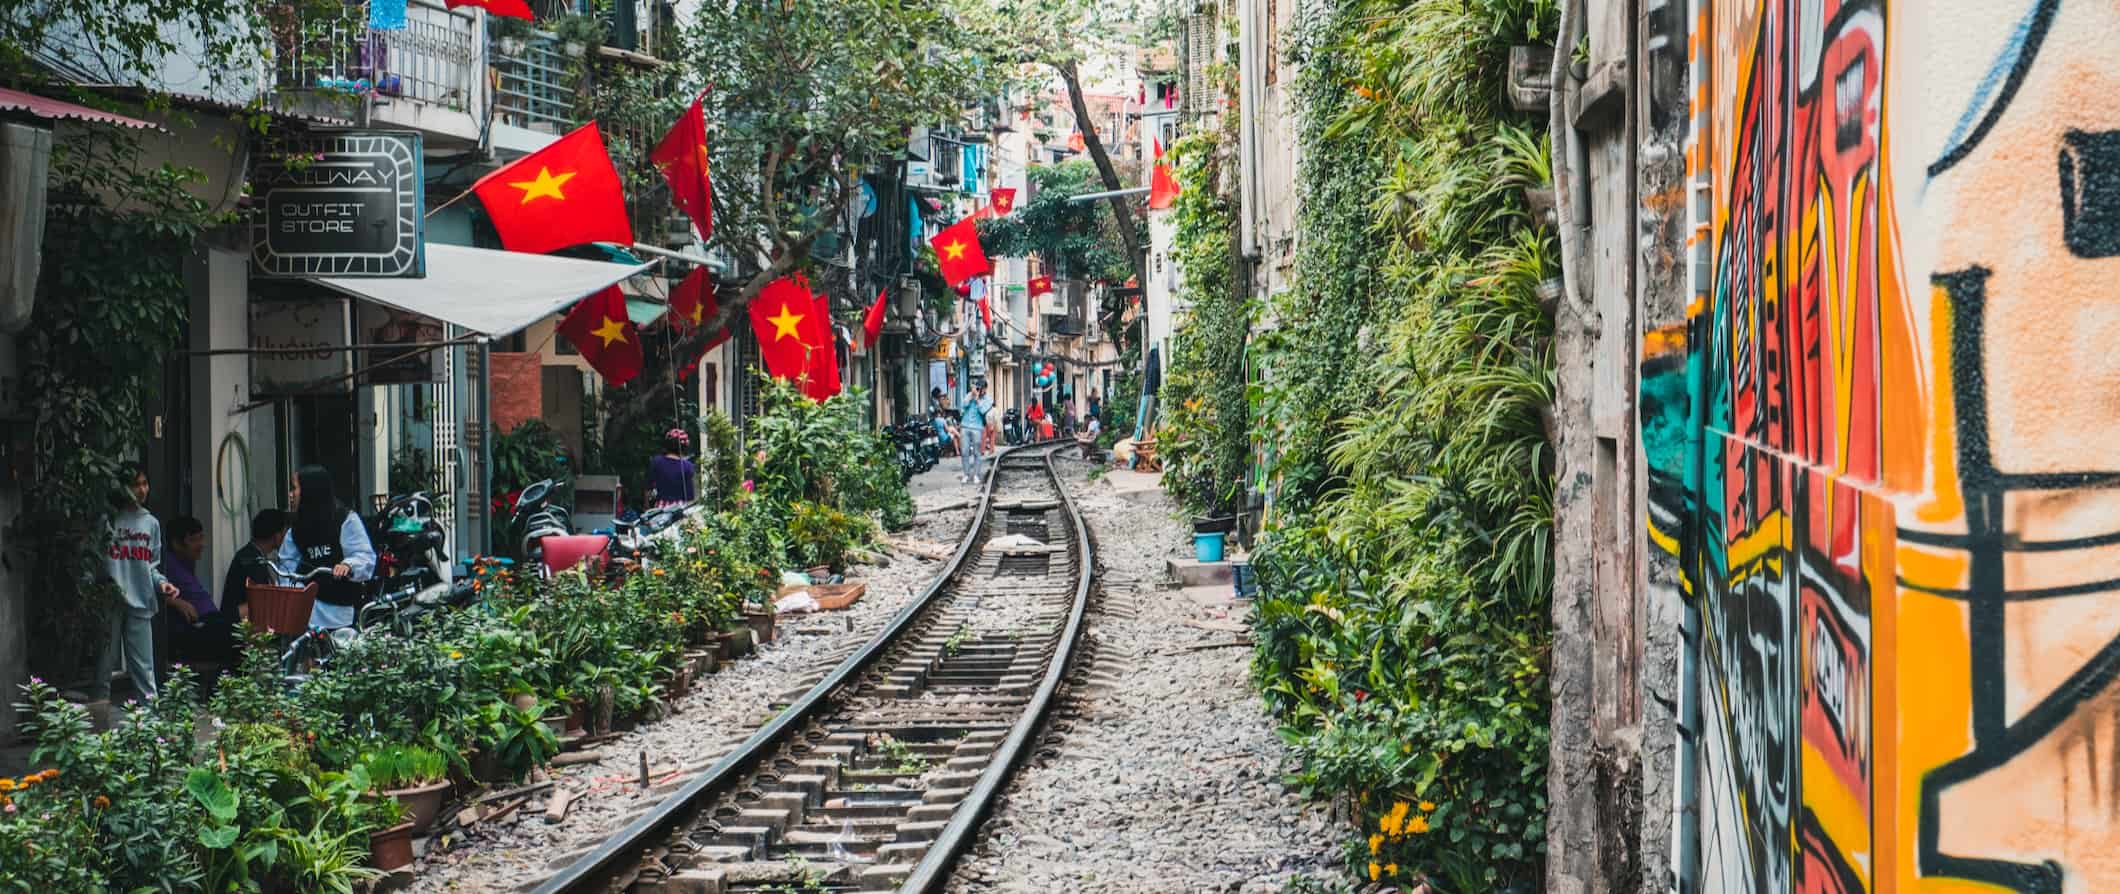 The famous city railroad inside the Old Town of bustling Hanoi